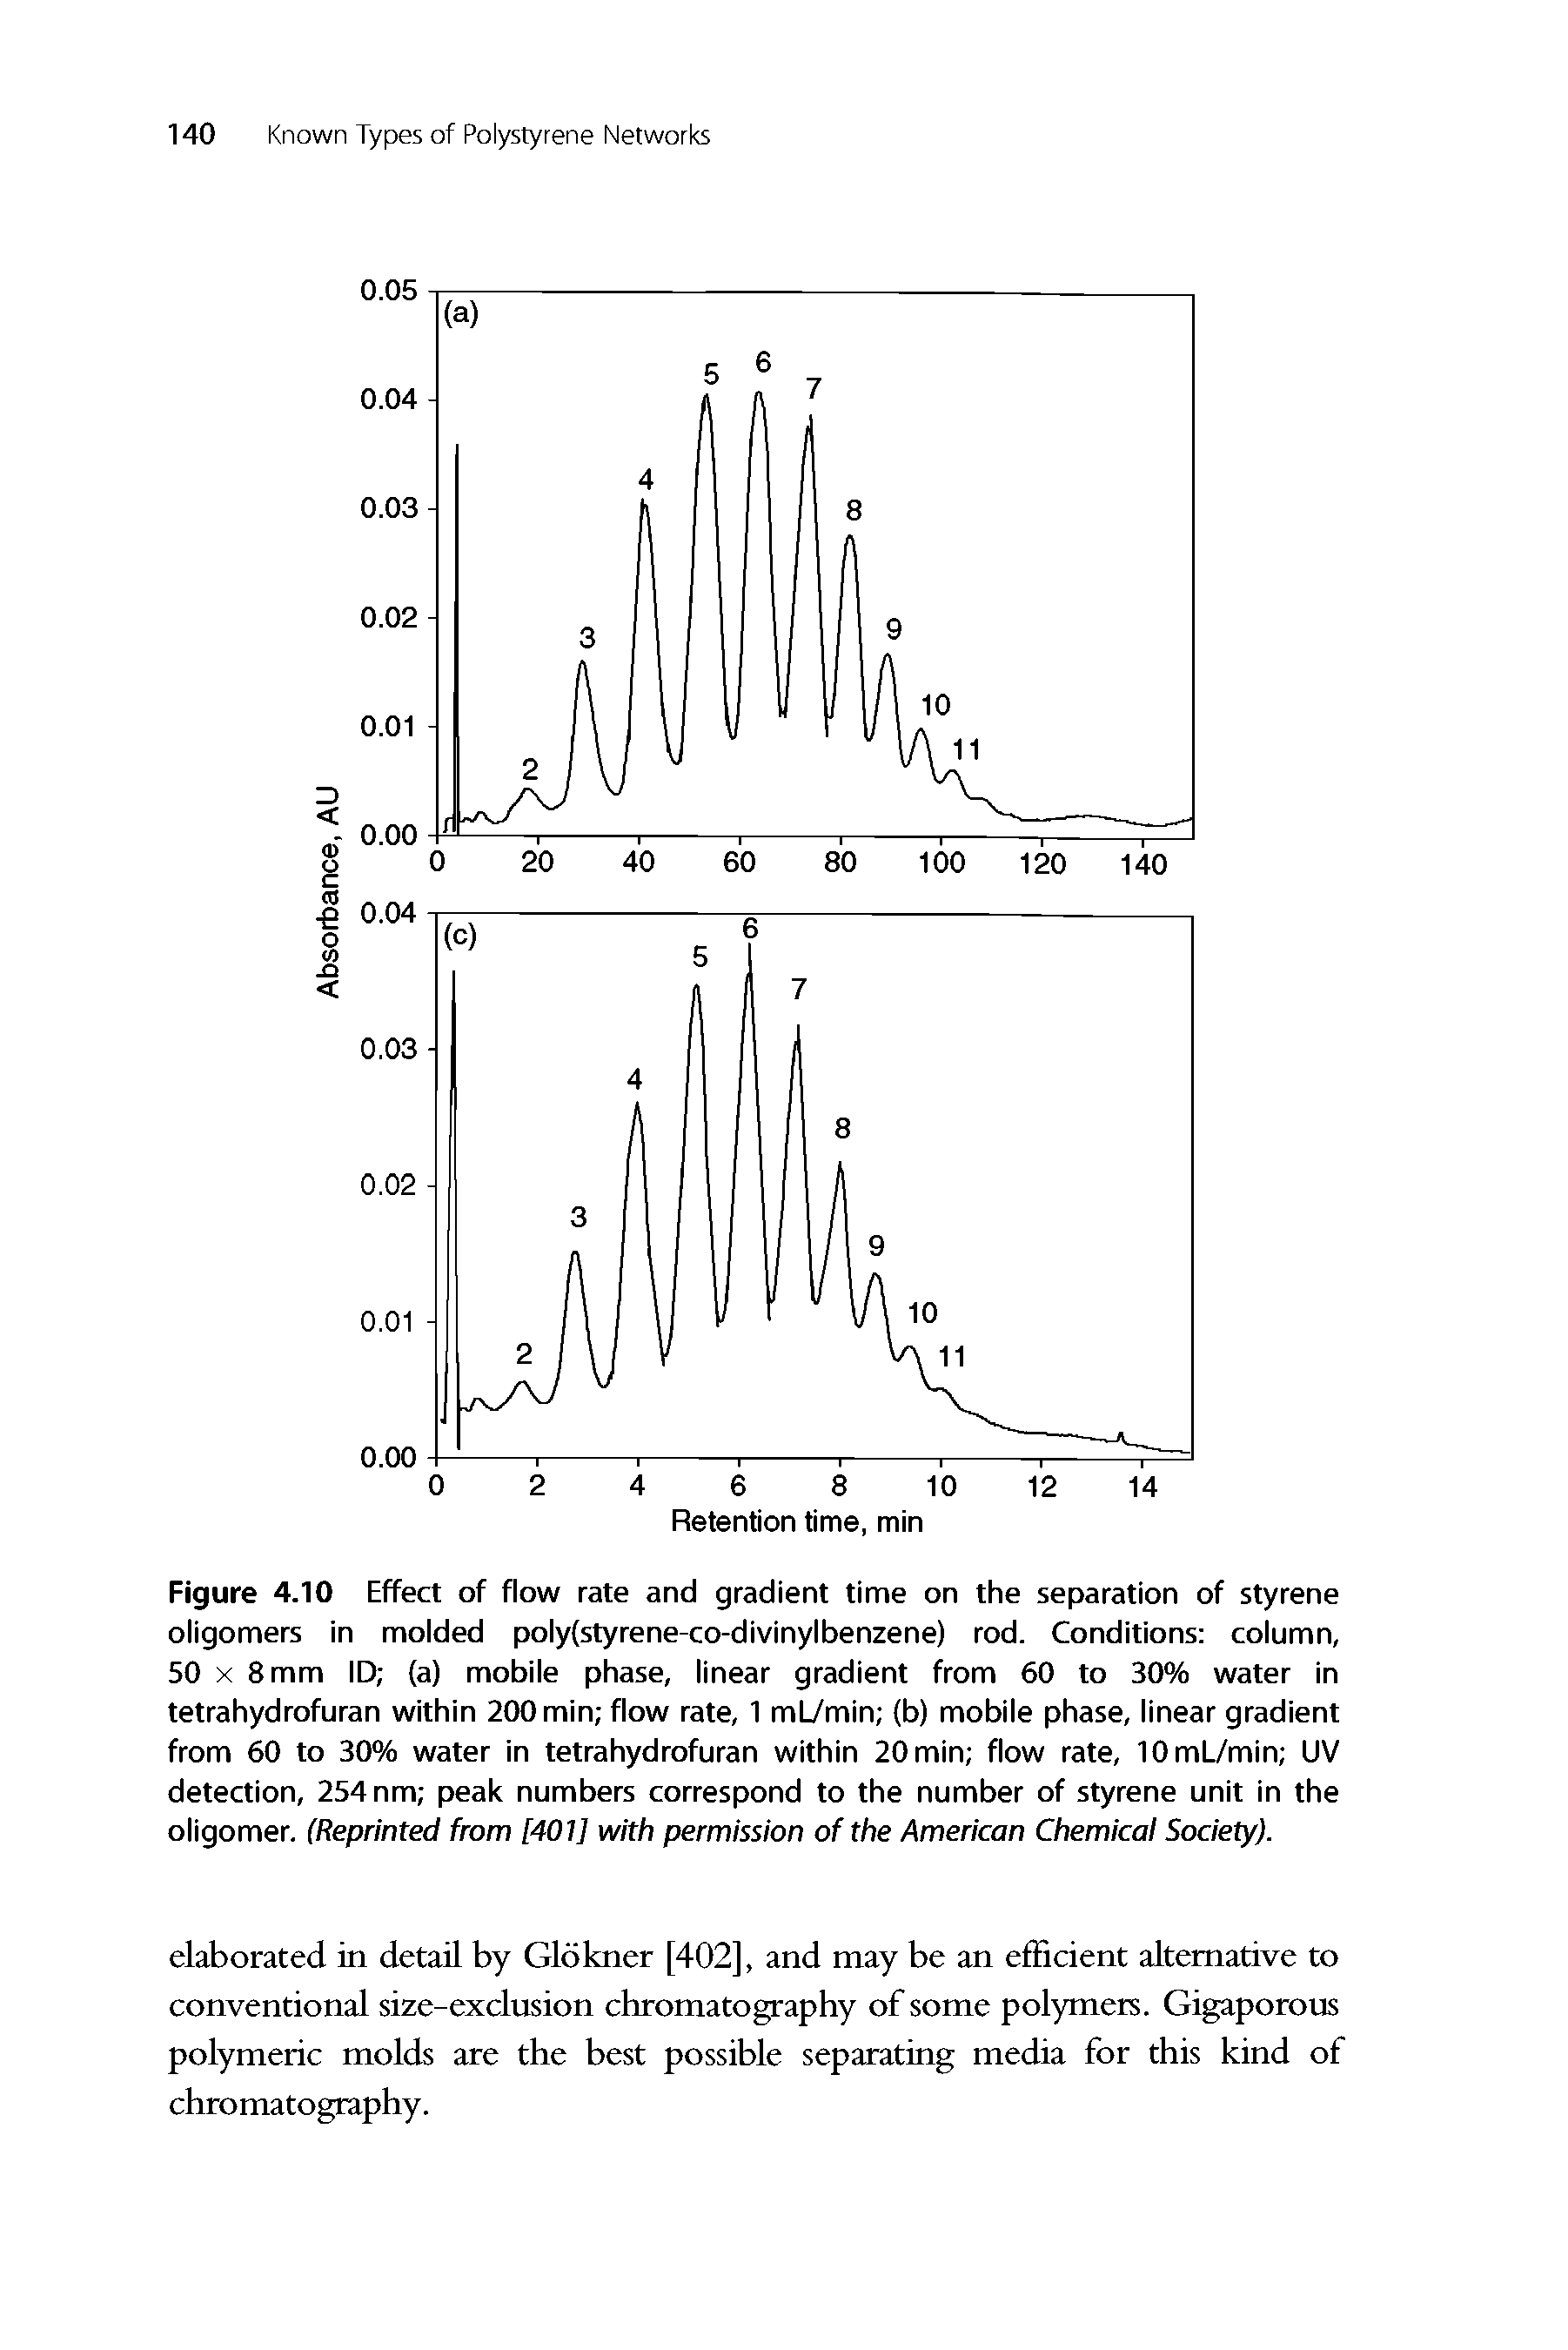 Figure 4.10 Effect of flow rate and gradient time on the separation of styrene oligomers in molded poly(styrene-co-divlnylbenzene) rod. Conditions column, 50 X 8 mm ID (a) mobile phase, linear gradient from 60 to 30% water in tetrahydrofuran within 200 min flow rate, 1 mL/mln (b) mobile phase, linear gradient from 60 to 30% water in tetrahydrofuran within 20 min flow rate, 10ml7min UV detection, 254 nm peak numbers correspond to the number of styrene unit in the oligomer. (Reprinted from [401] with permission of the American Chemicai Society).